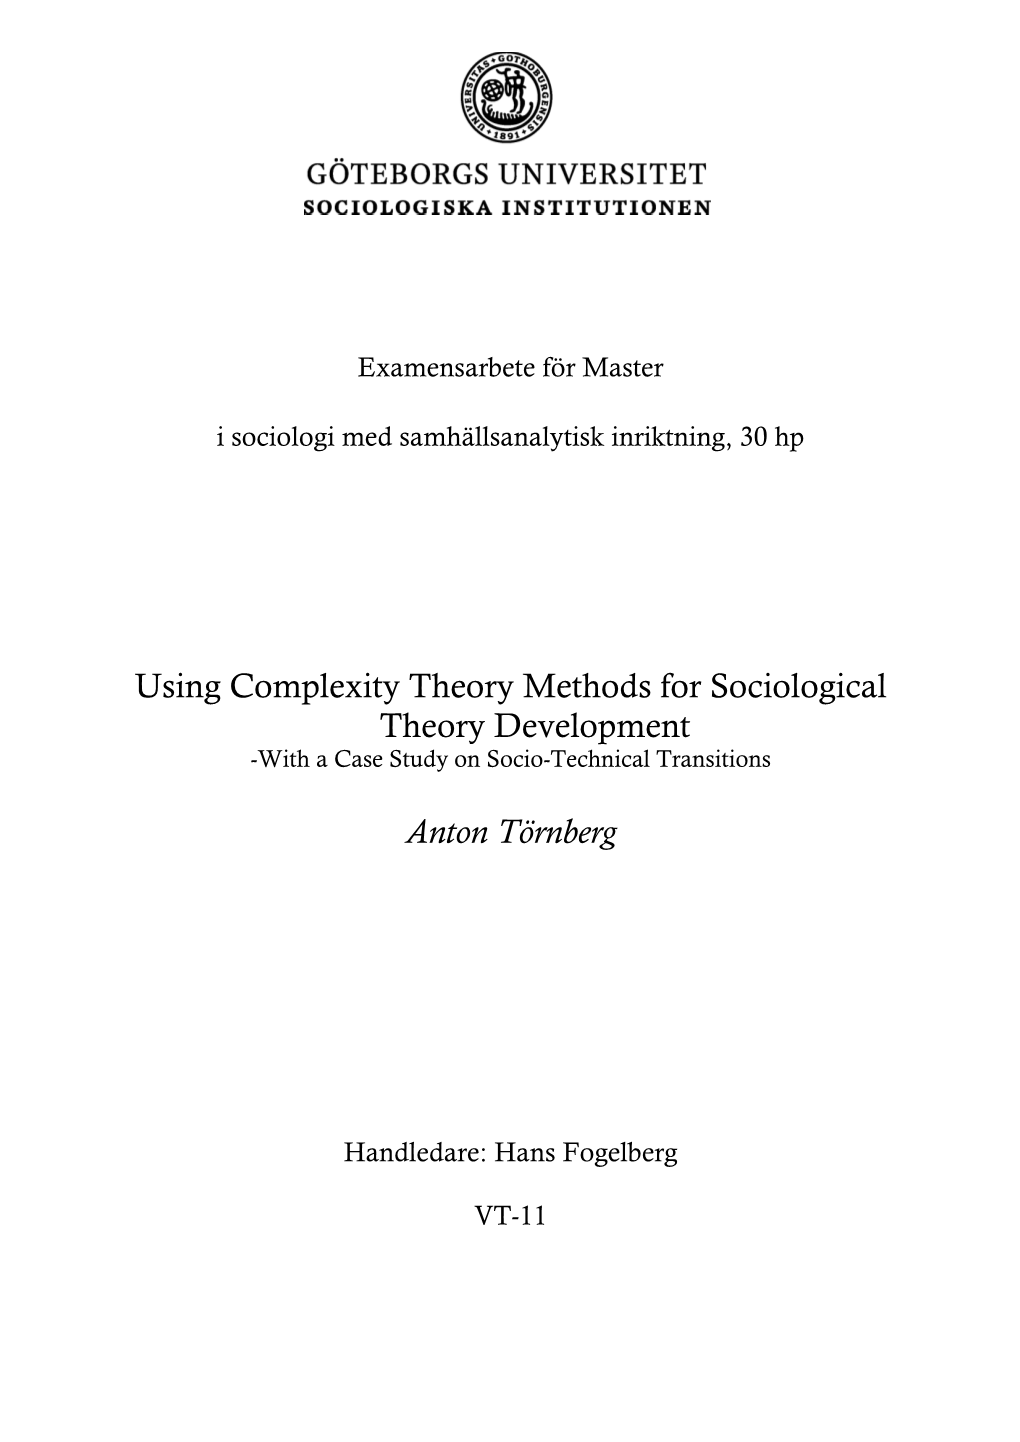 Using Complexity Theory Methods for Sociological Theory Development -With a Case Study on Socio-Technical Transitions